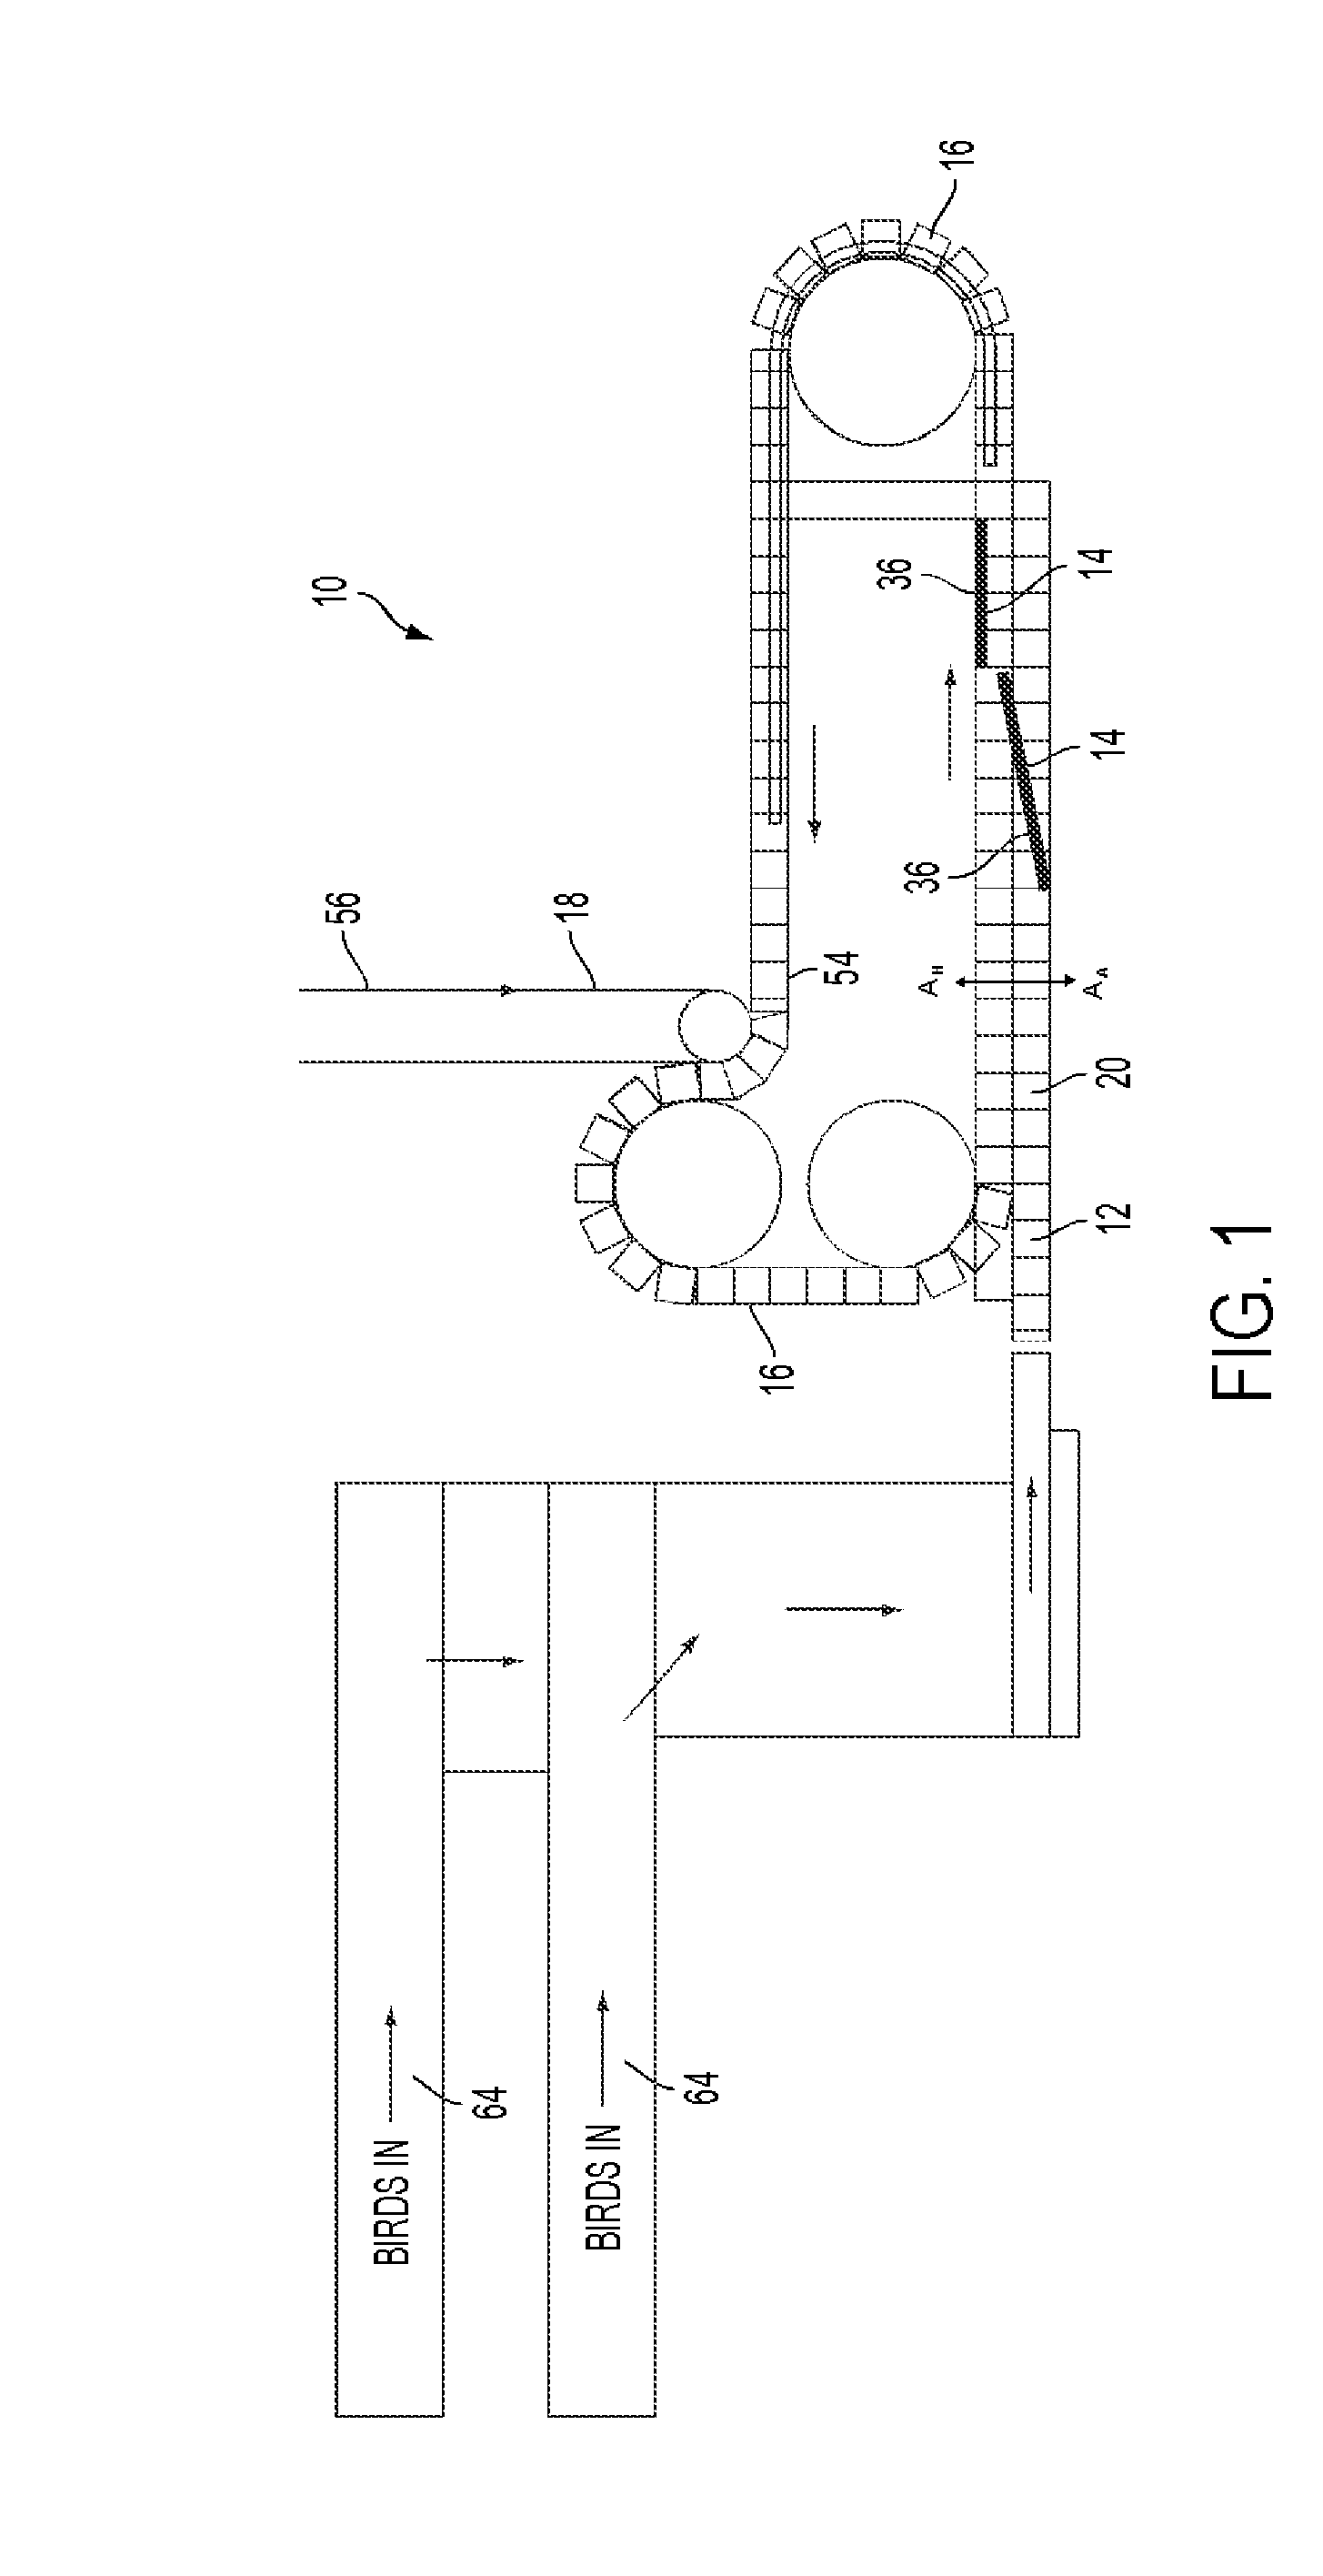 Automated poultry hanging system and method